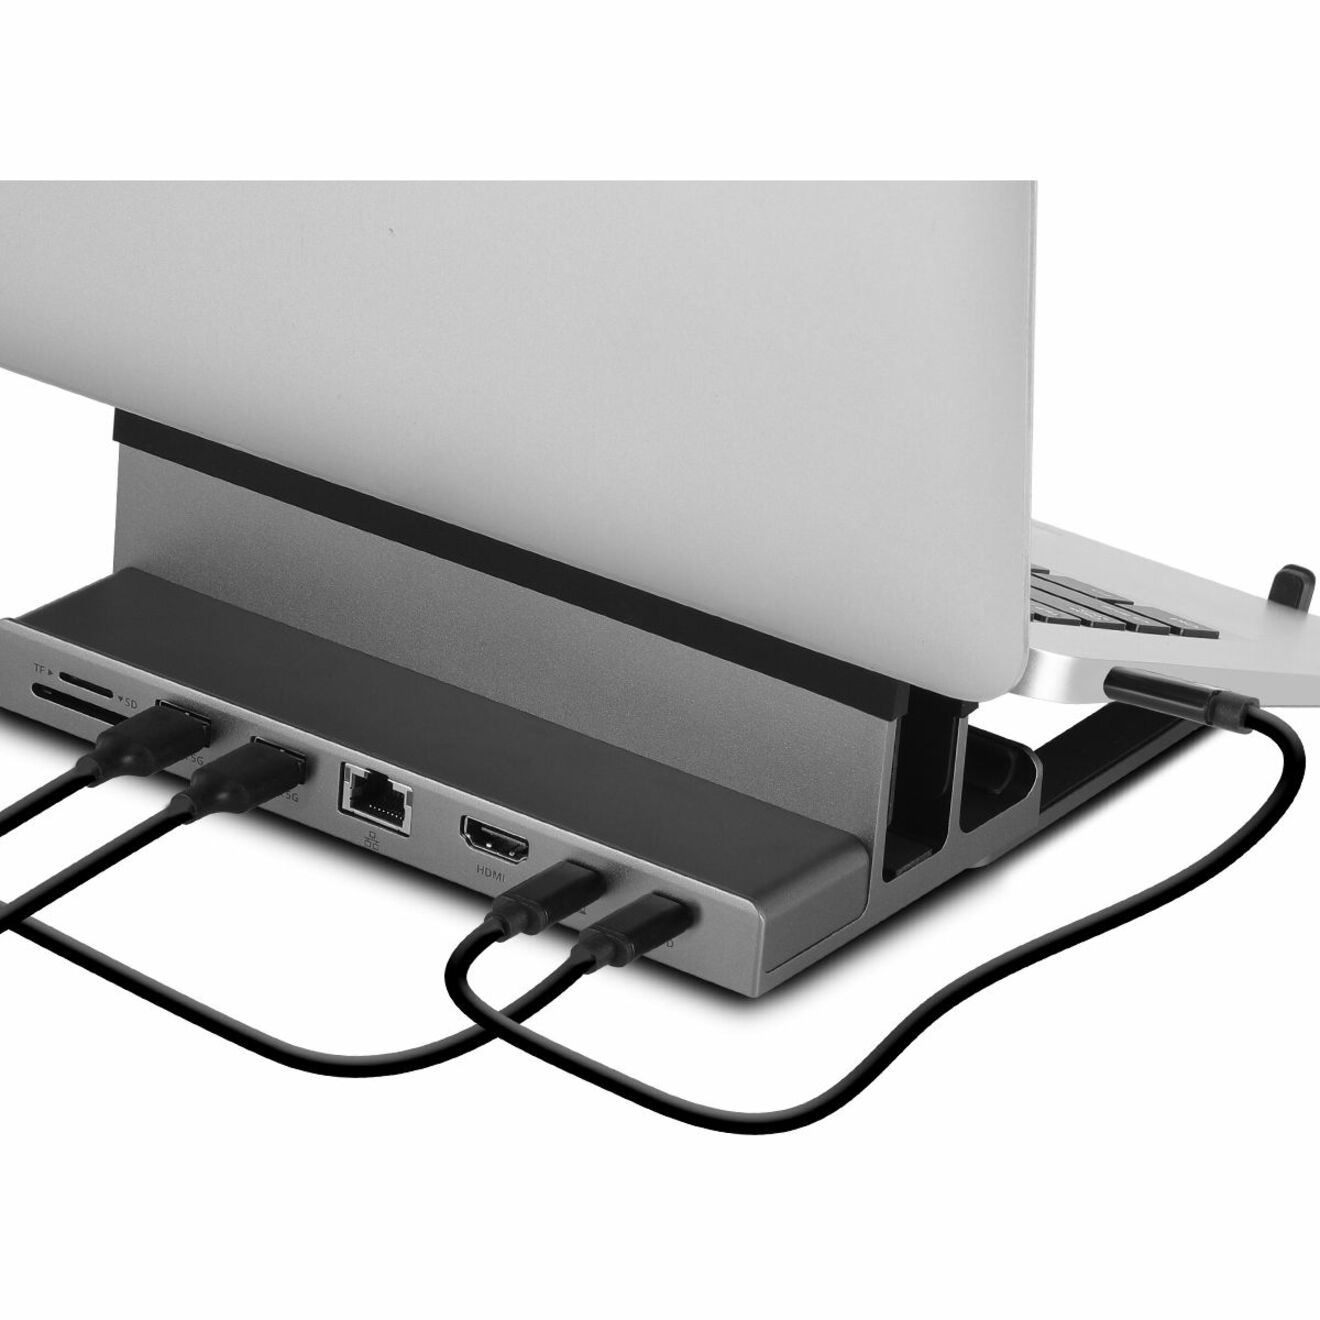 SIIG CE-MTDK21-S1 USB-C Laptop Stand W/ 4K Docking Station, 2 Year Warranty, Compatible with Windows, Mac, and More